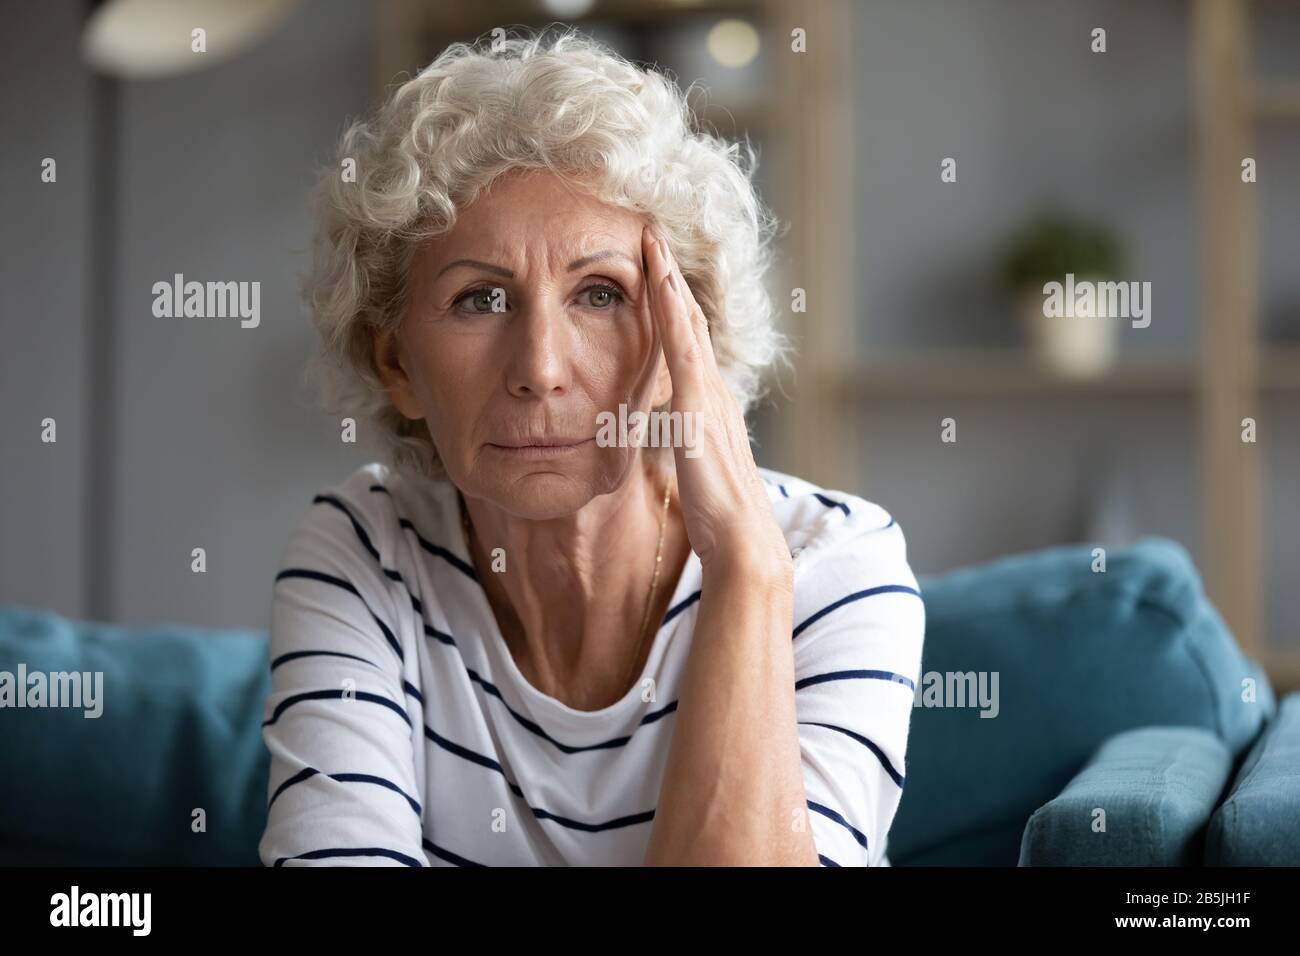 Upset elderly woman feel lonely suffer from depression Stock Photo